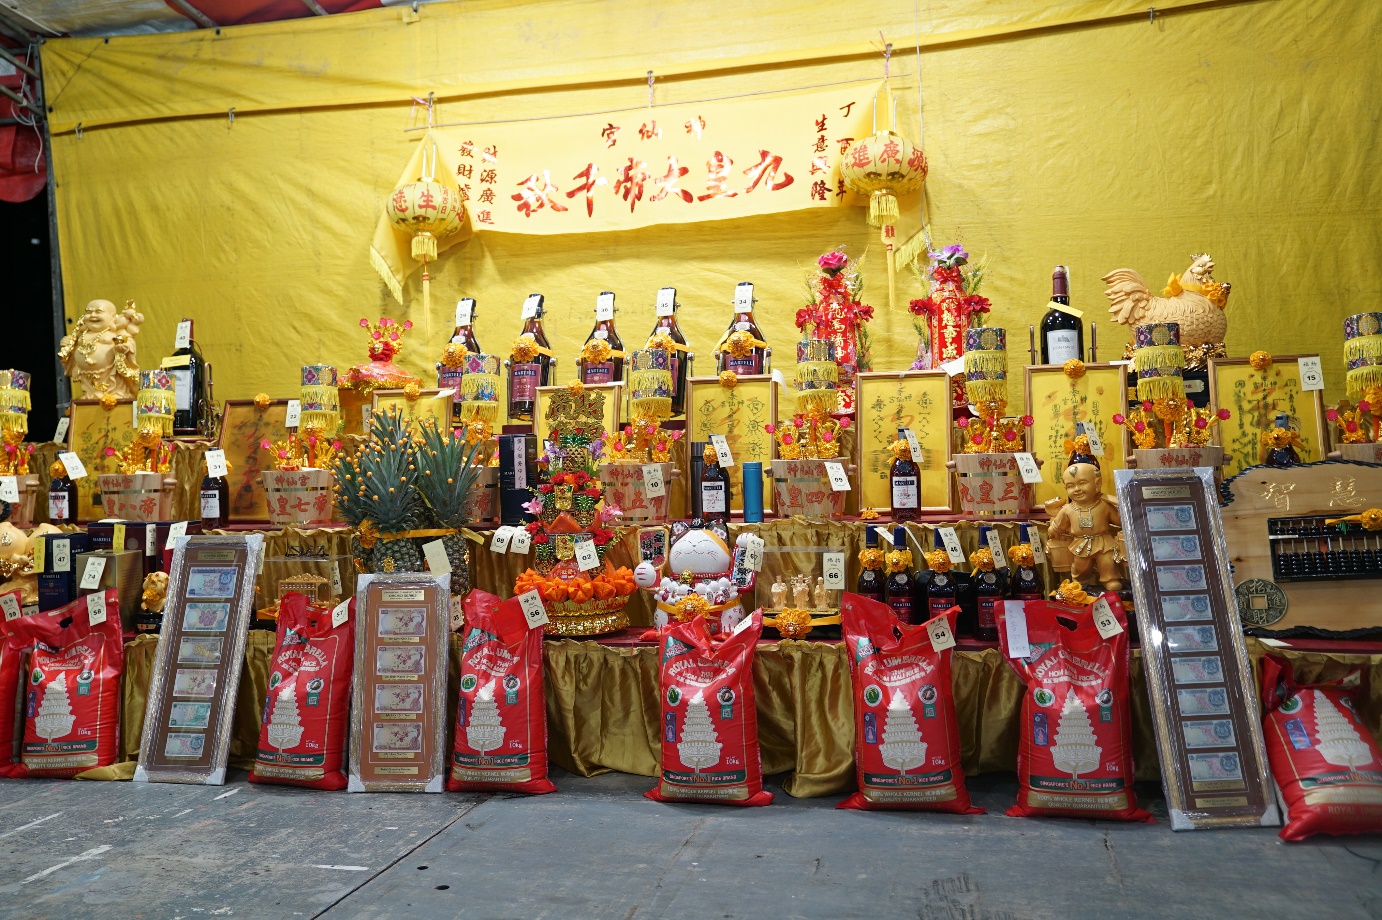 The items up for auctions include wine, talisman, rice bucket, rice packs and many other auspicious items.